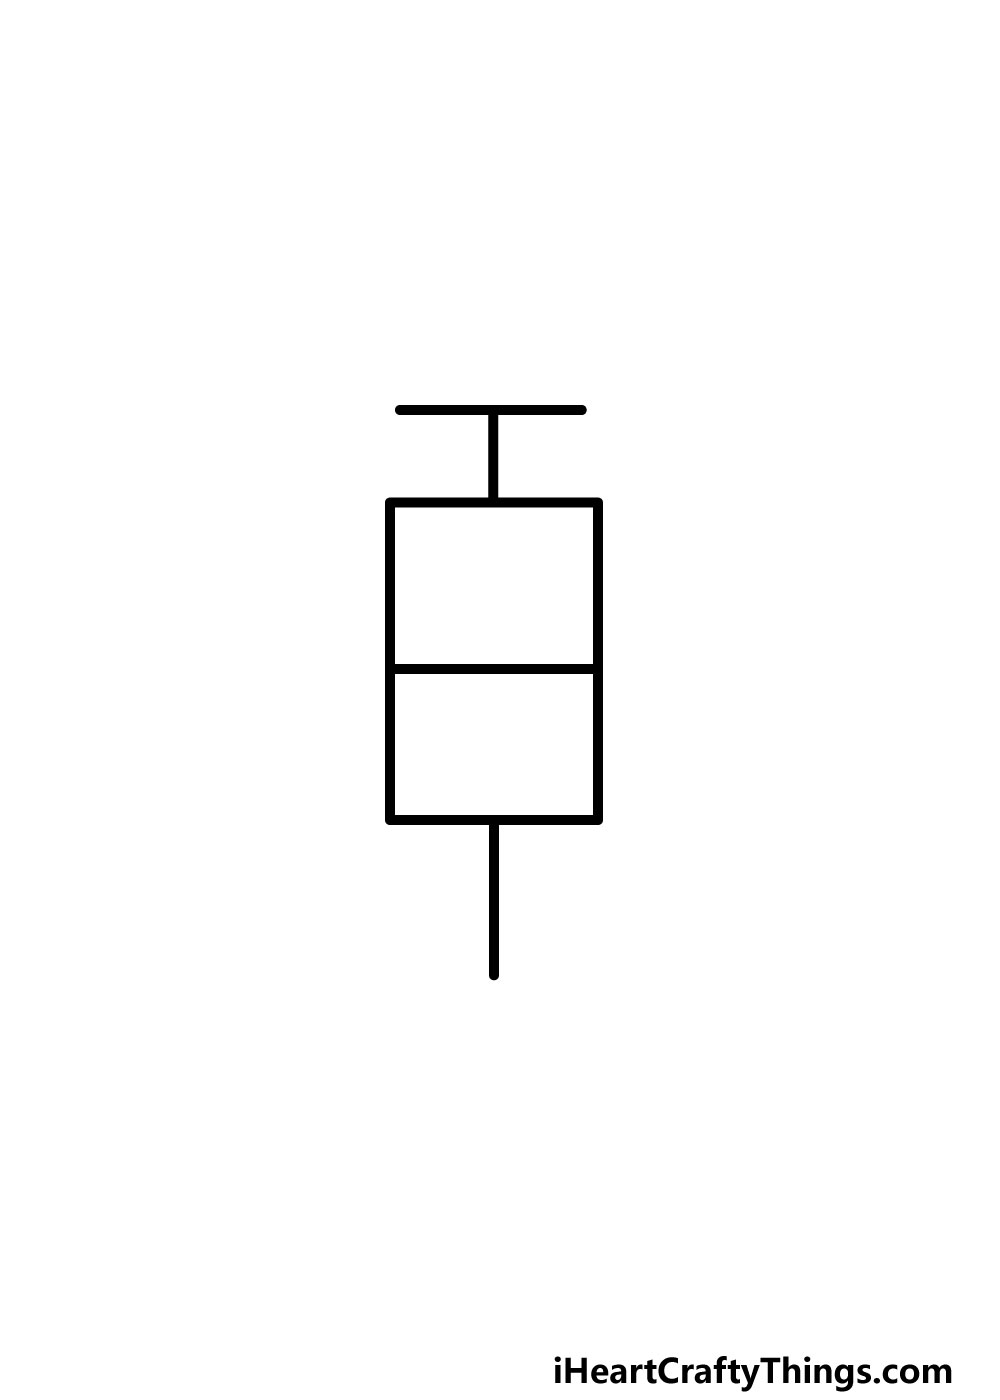 How to Draw A Box Plot step 4